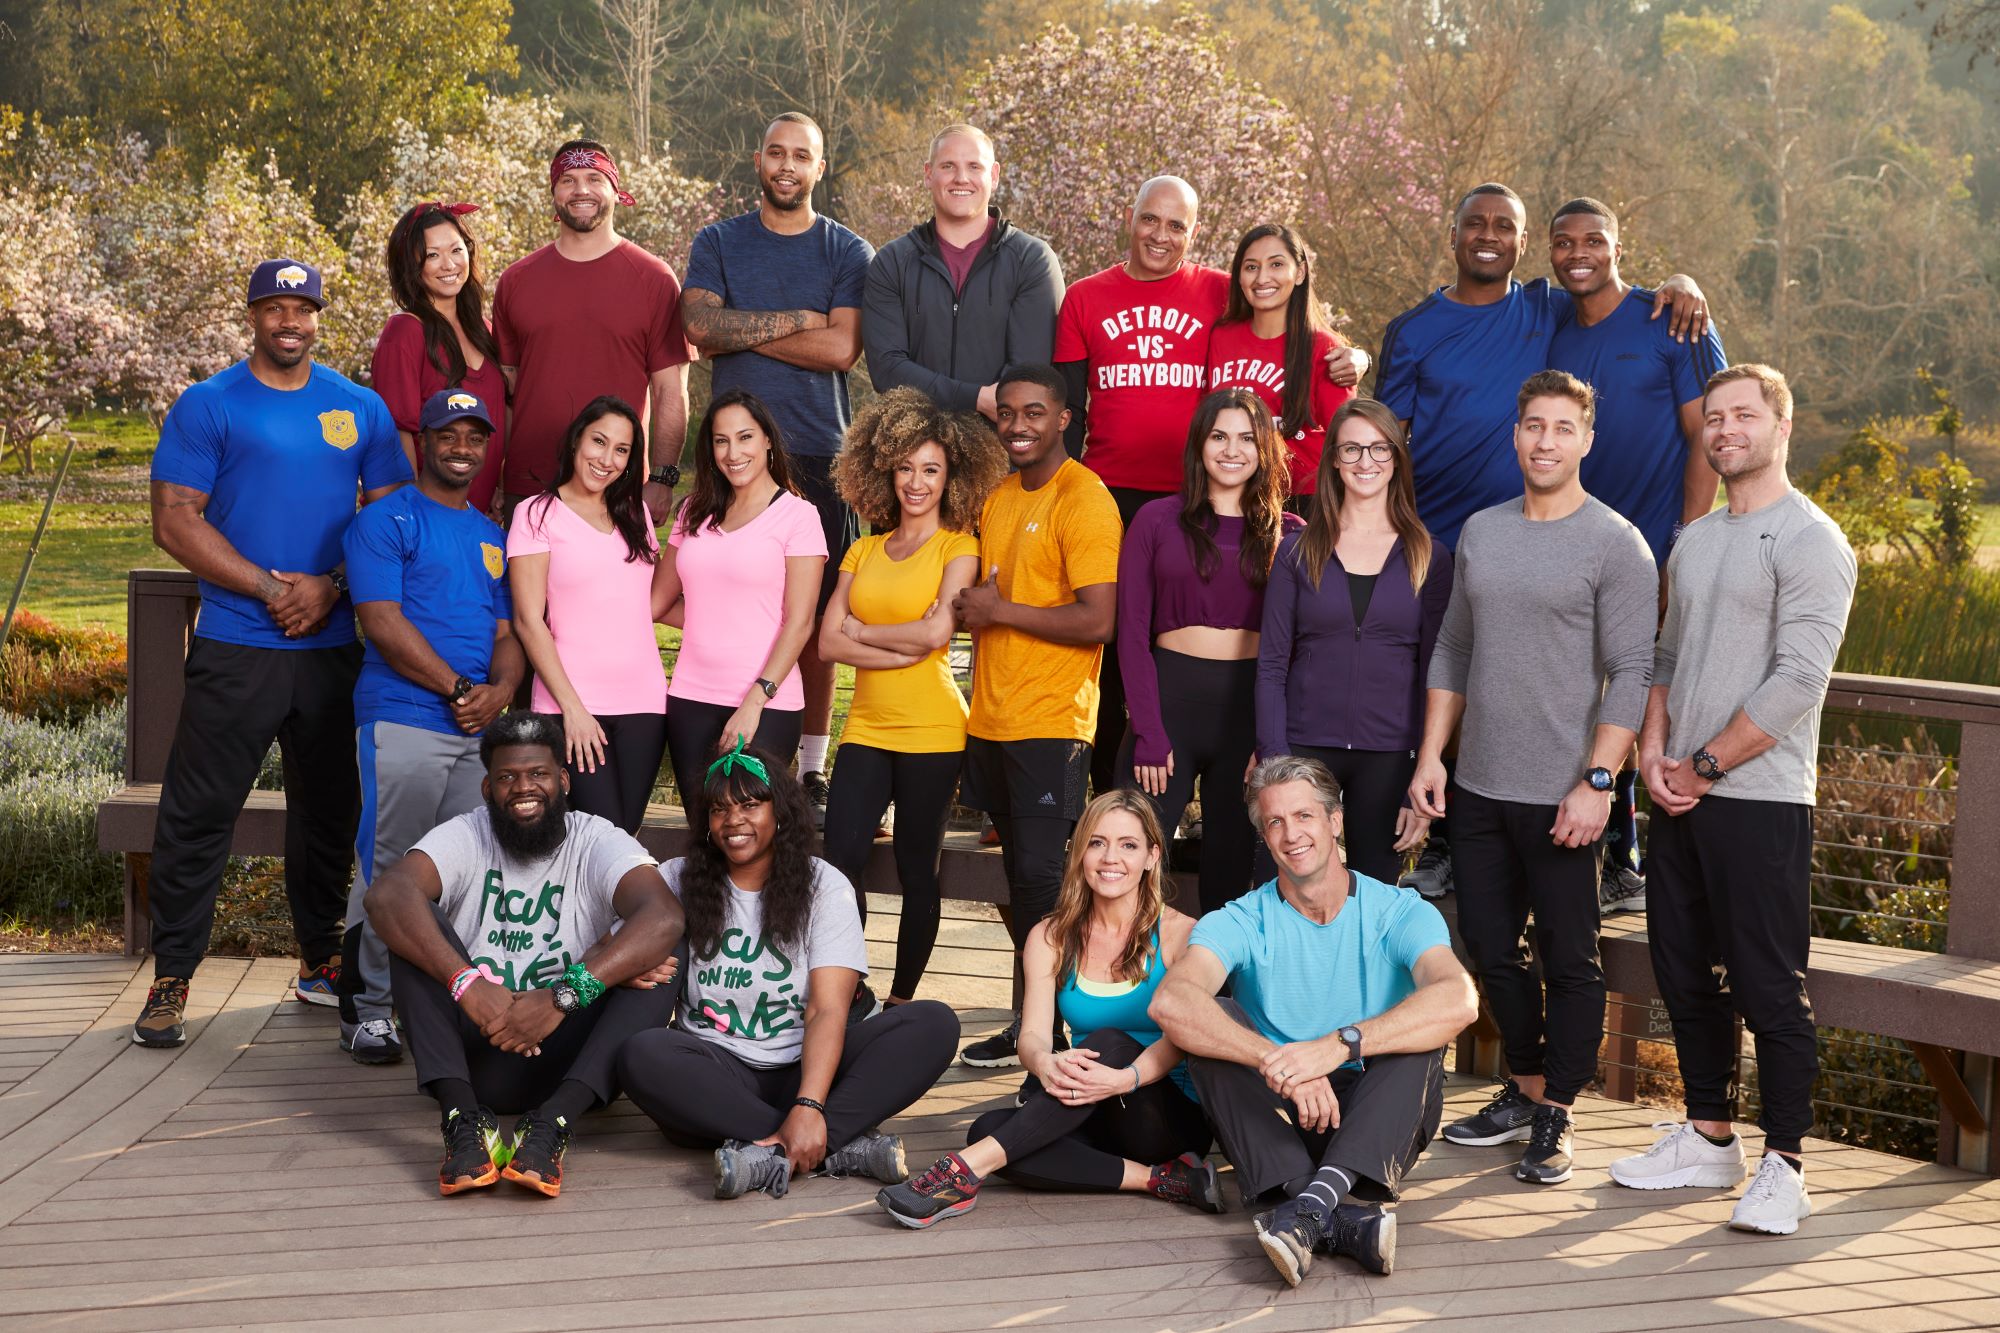 The cast of 'The Amazing Race' Season 33 pose together for promotional photos in a park, and all 22 contestants are in their race gear.